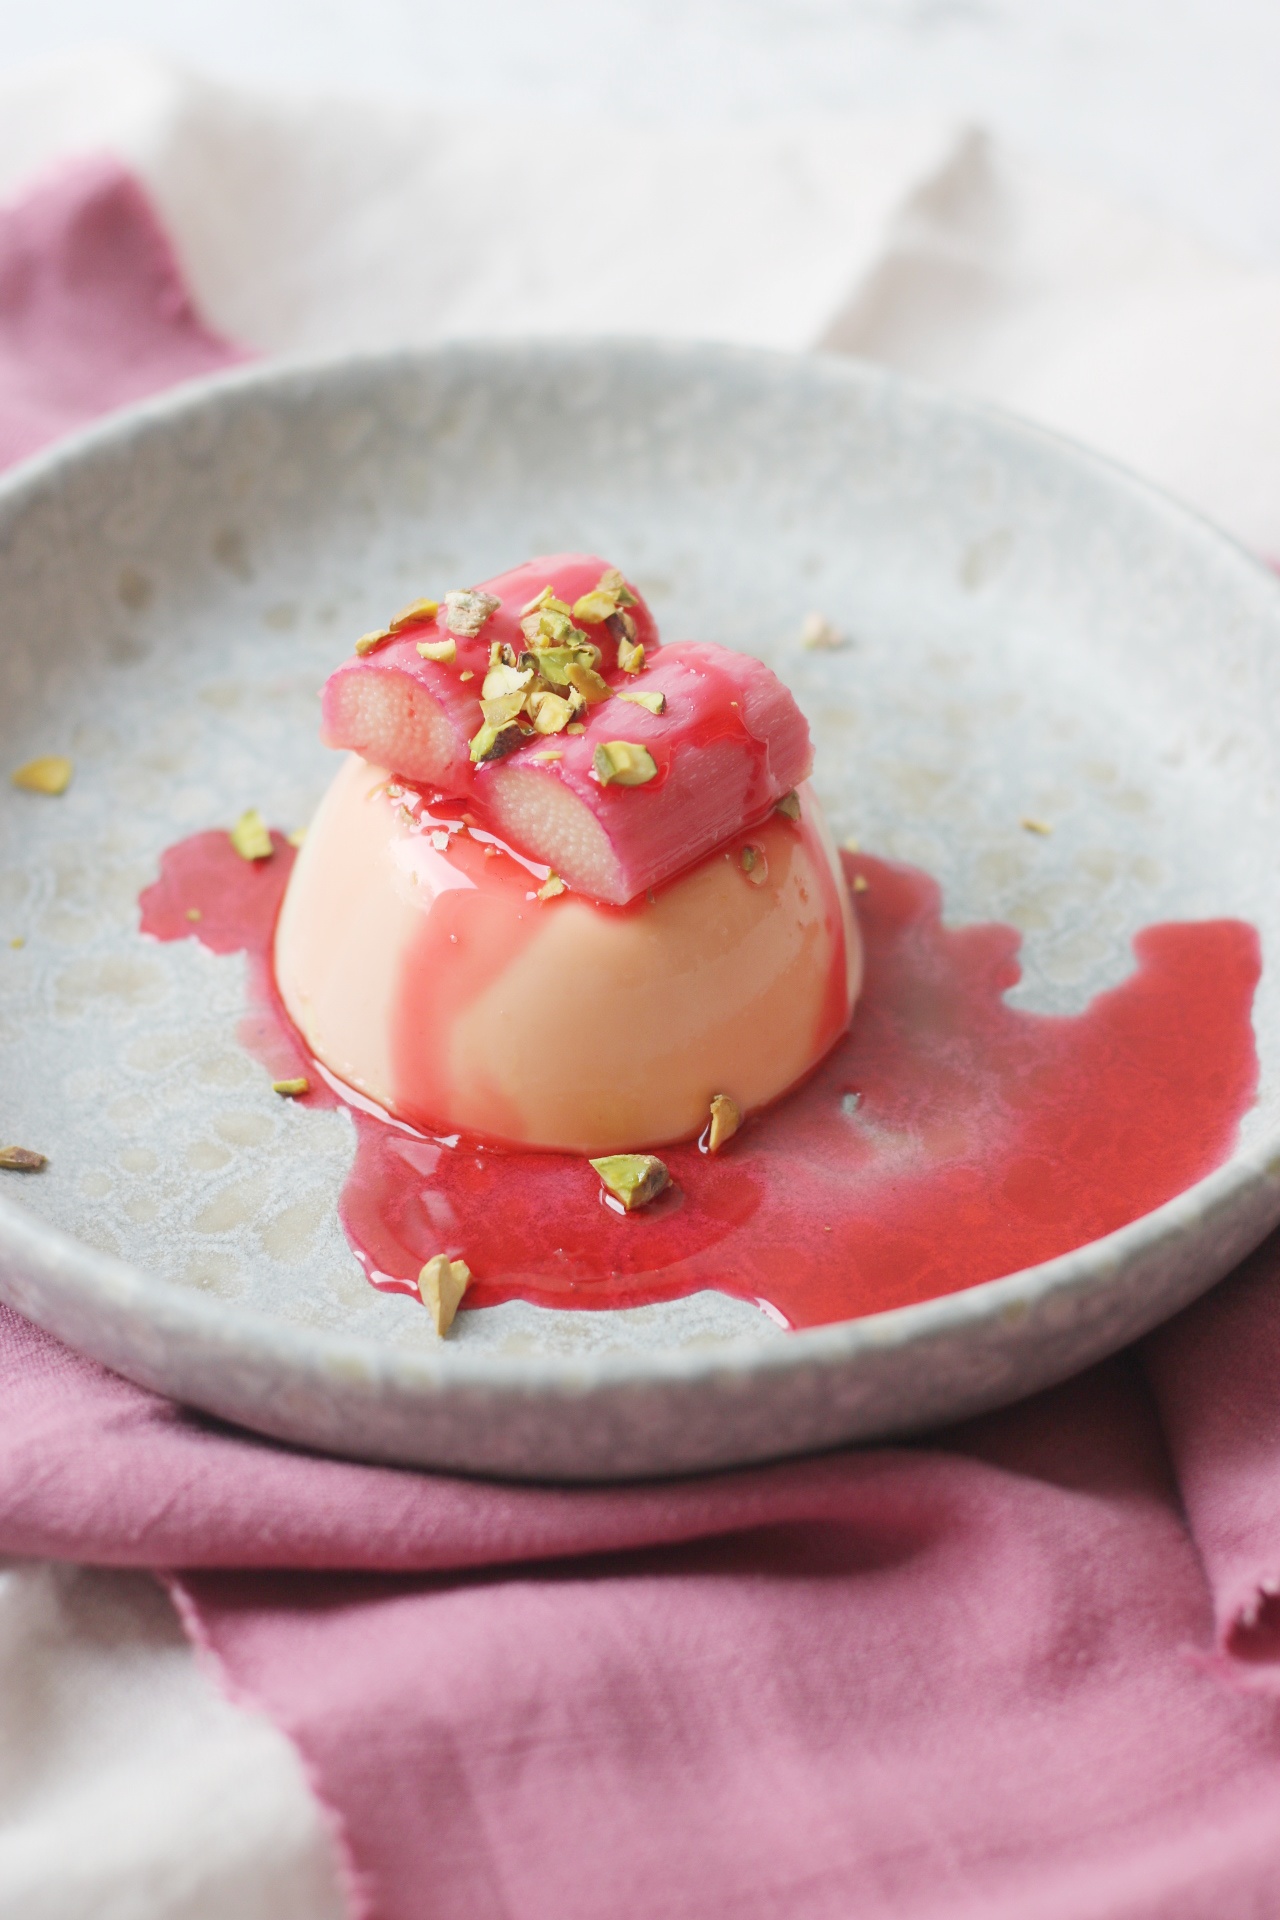 Vegan Panna Cotta topped with poached rhubarb and pistachio